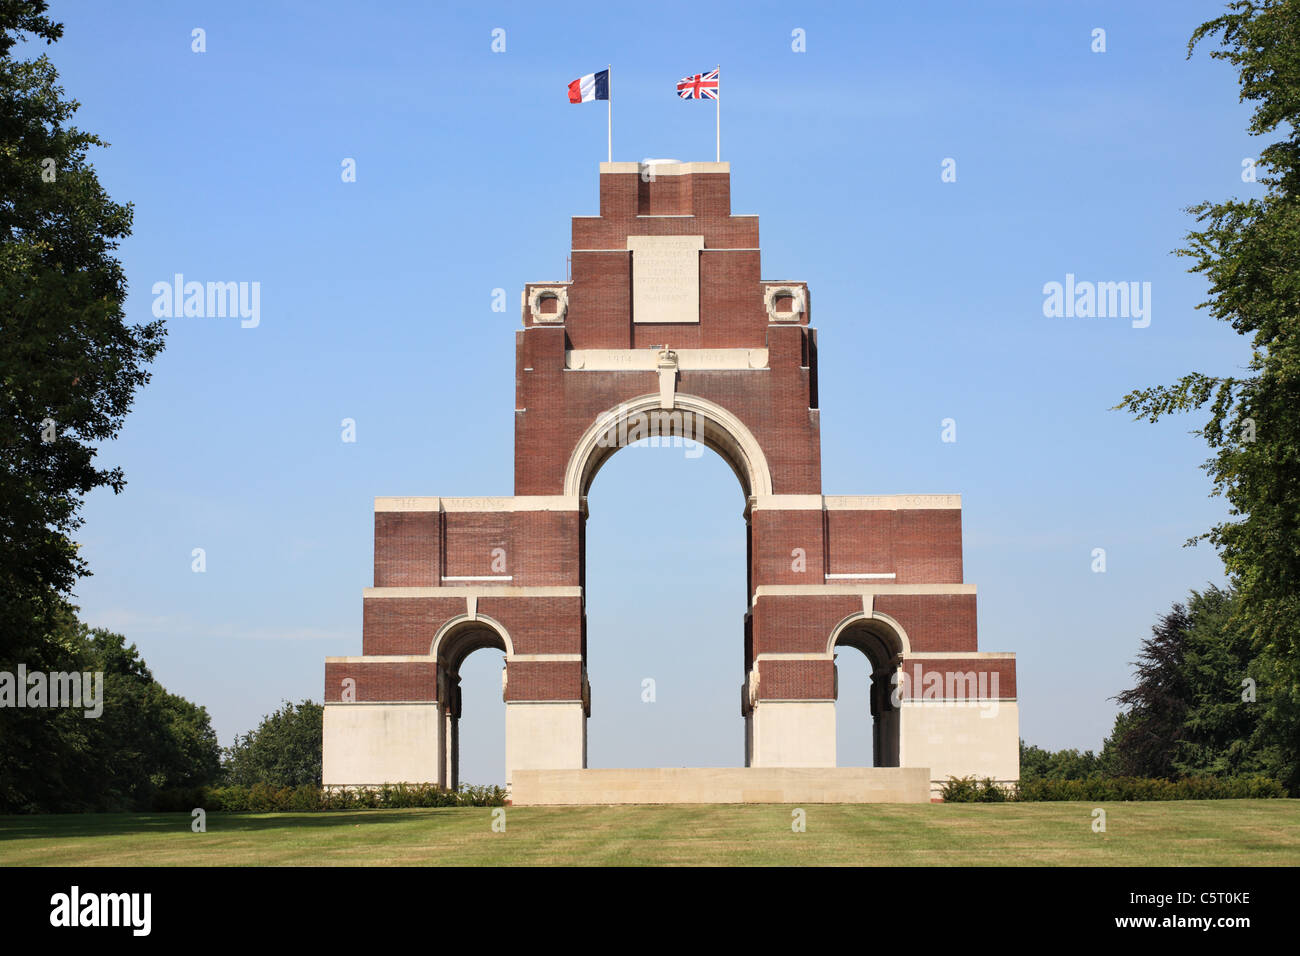 WW1 military cemetery and memorial at Thiepval, near Albert, Picardy, France, Europe. Stock Photo